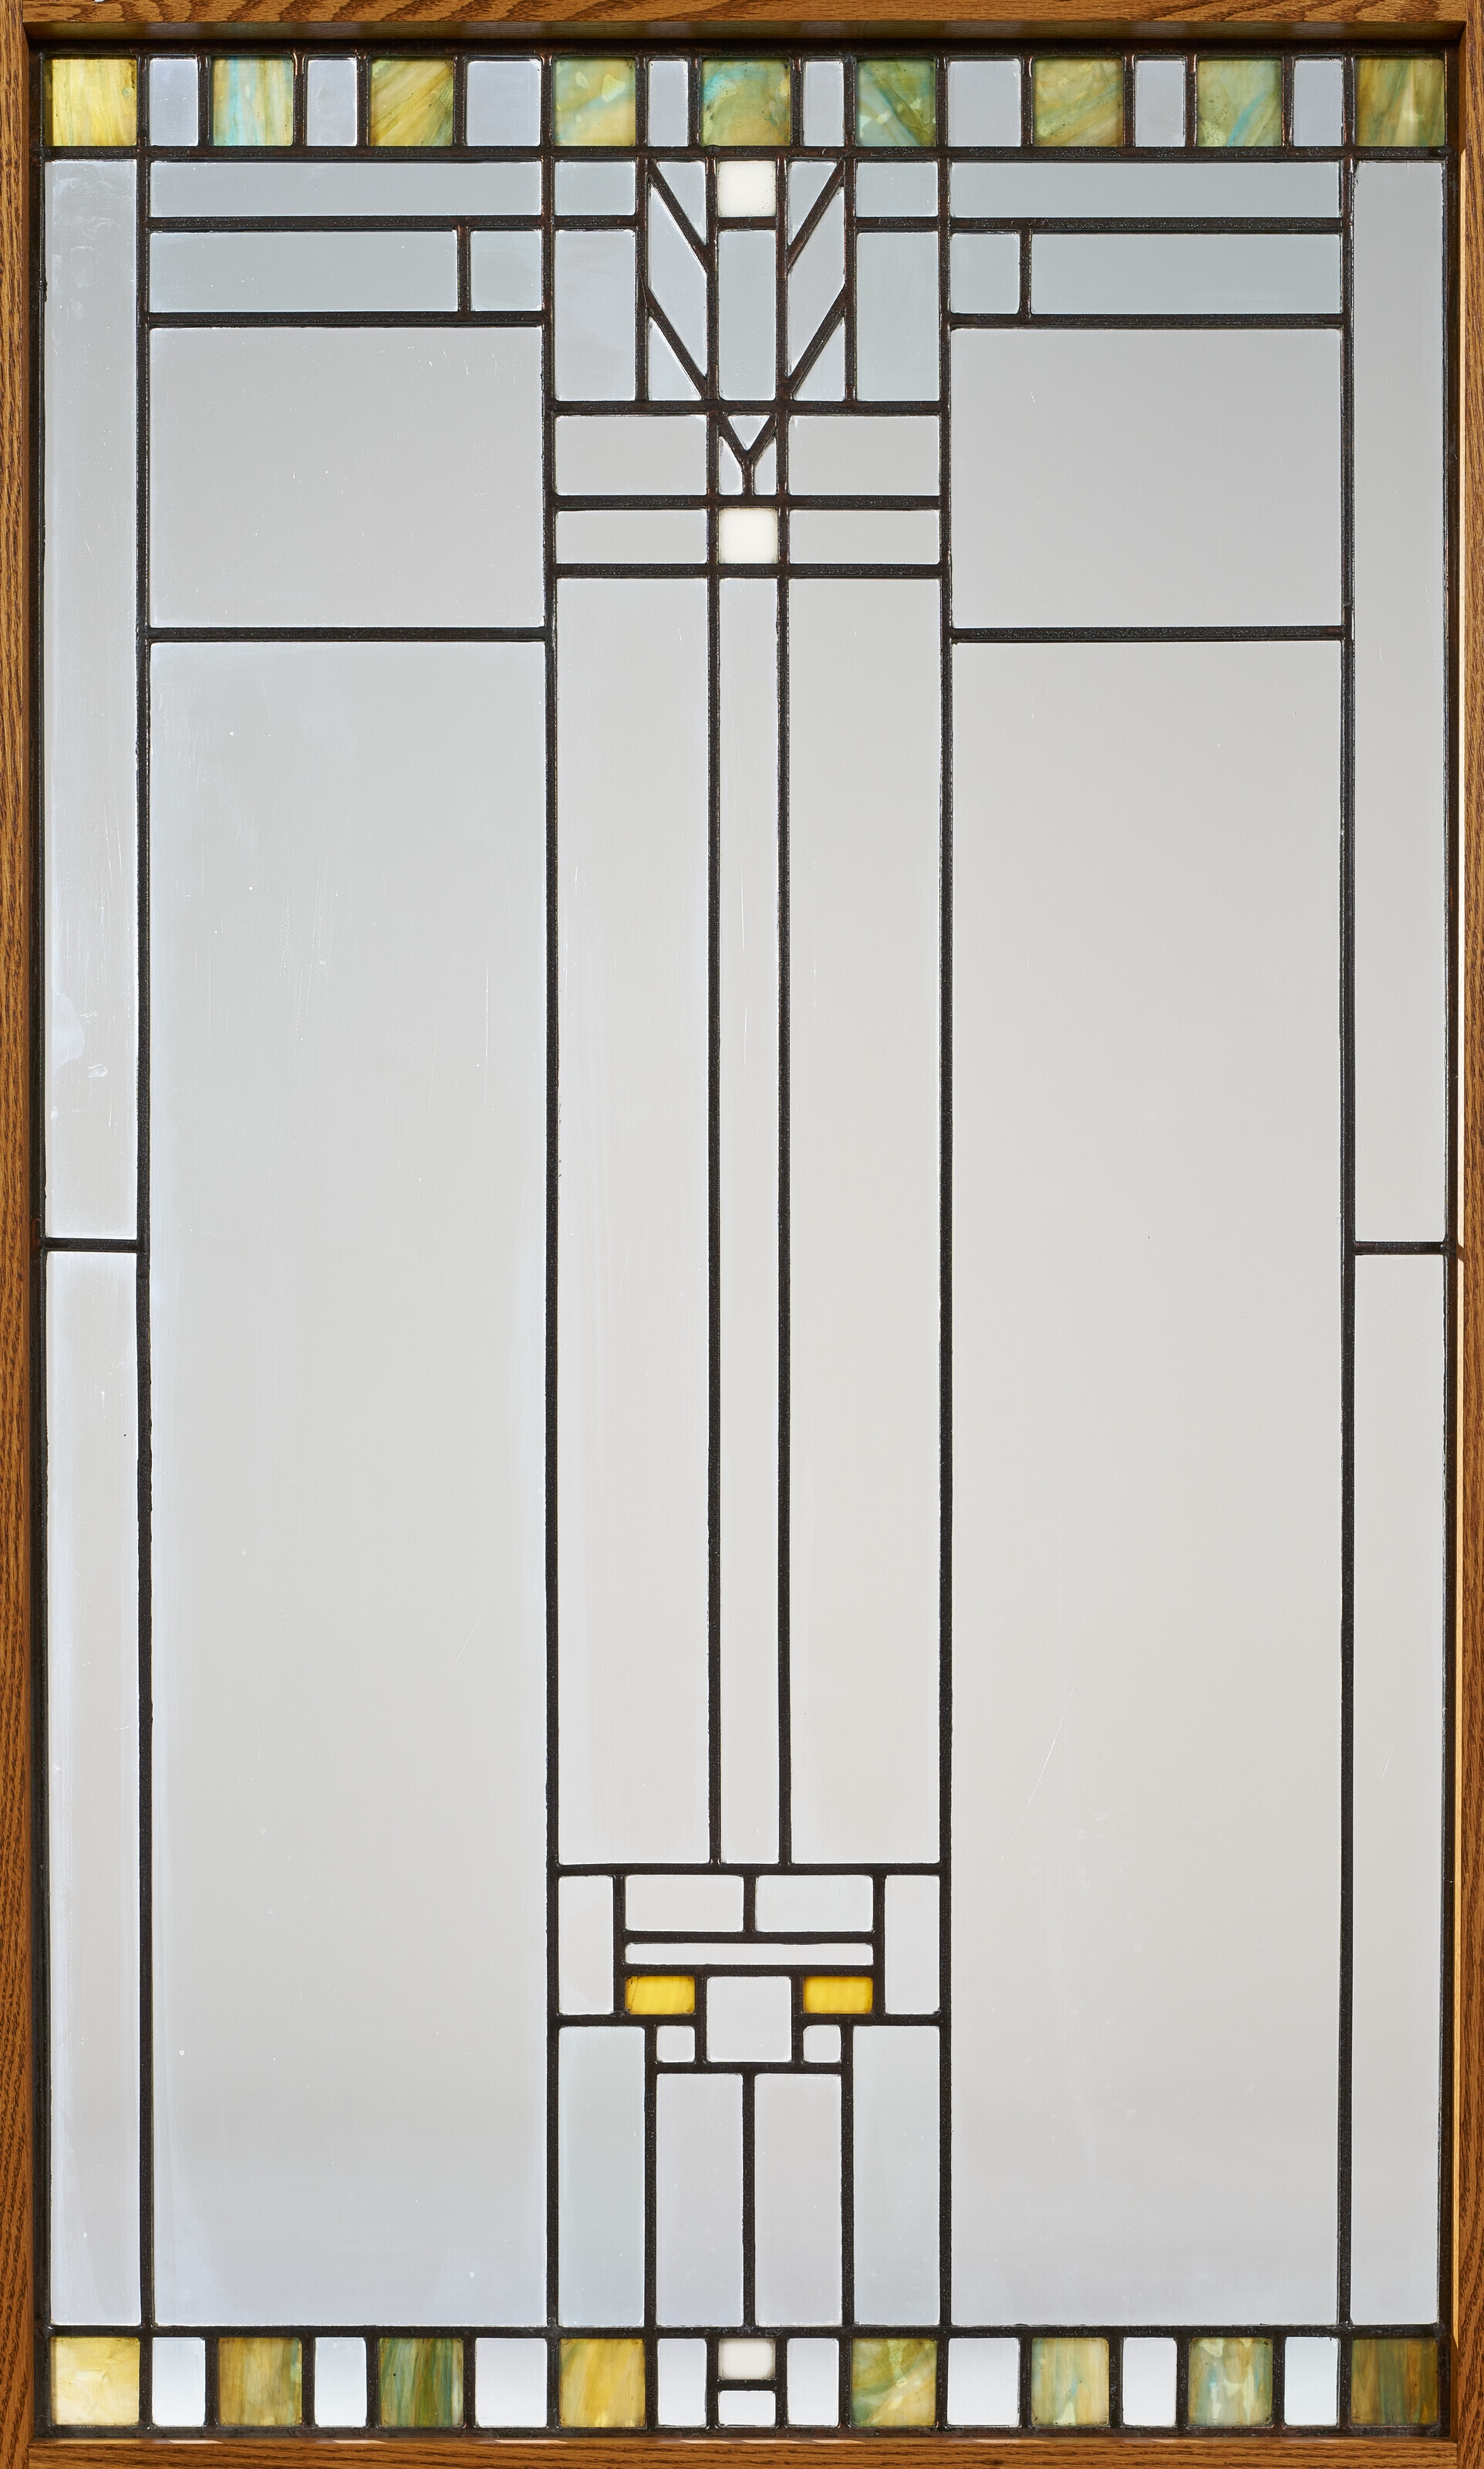 Artwork by Frank Lloyd Wright, WINDOW FROM THE MEYER MAY HOUSE, GRAND RAPIDS, MICHIGAN, Made of polychrome leaded glass, wood